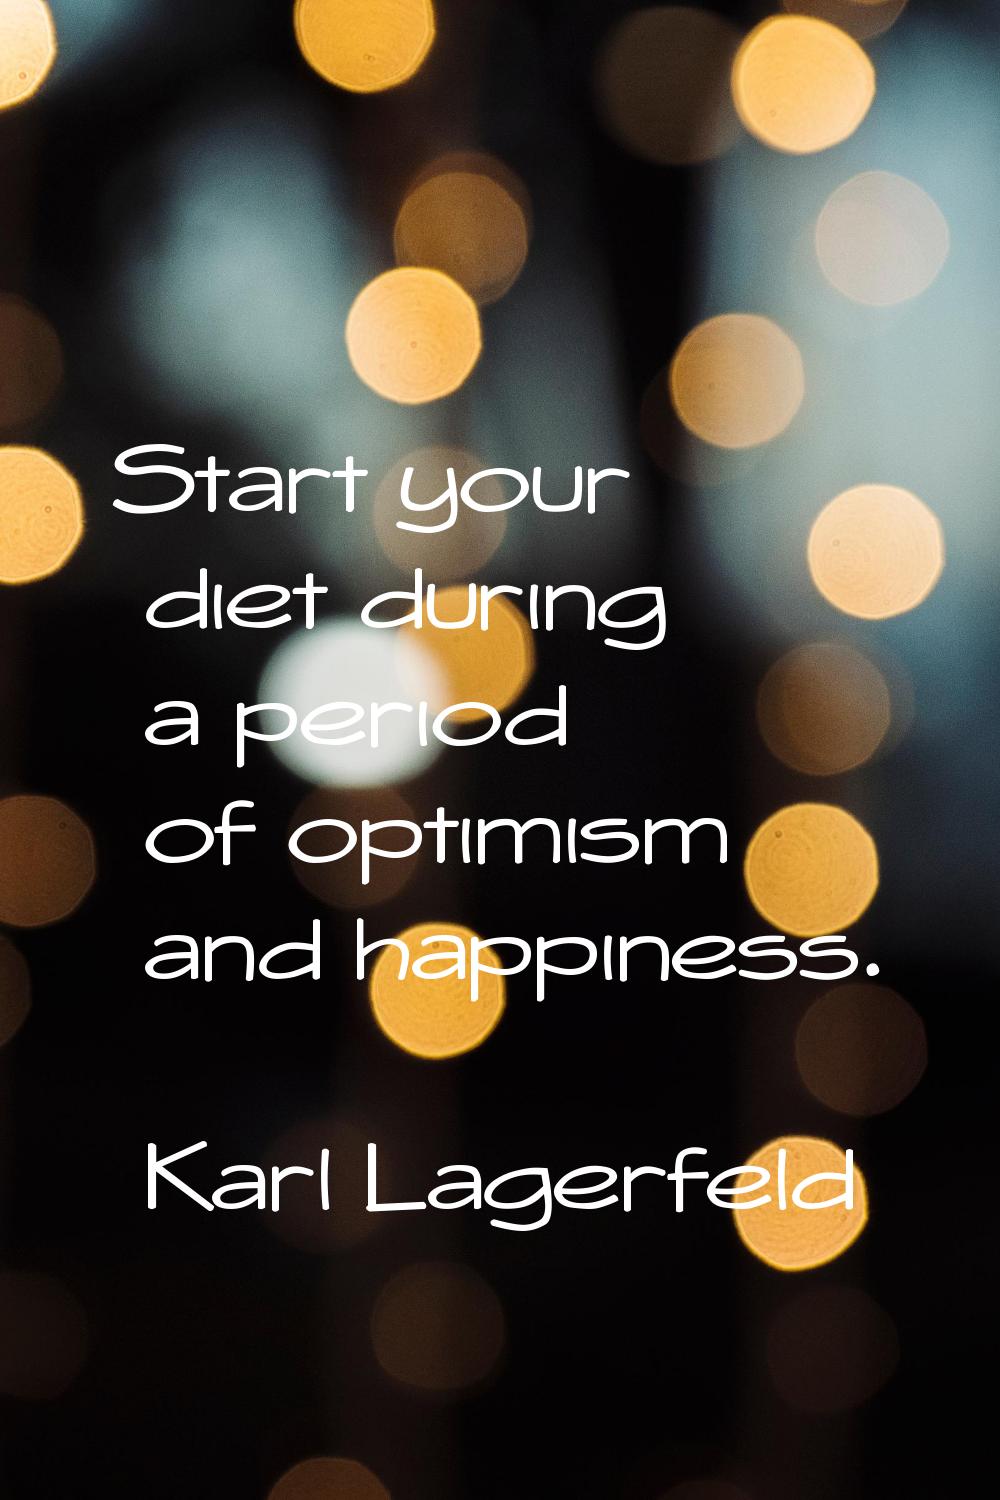 Start your diet during a period of optimism and happiness.